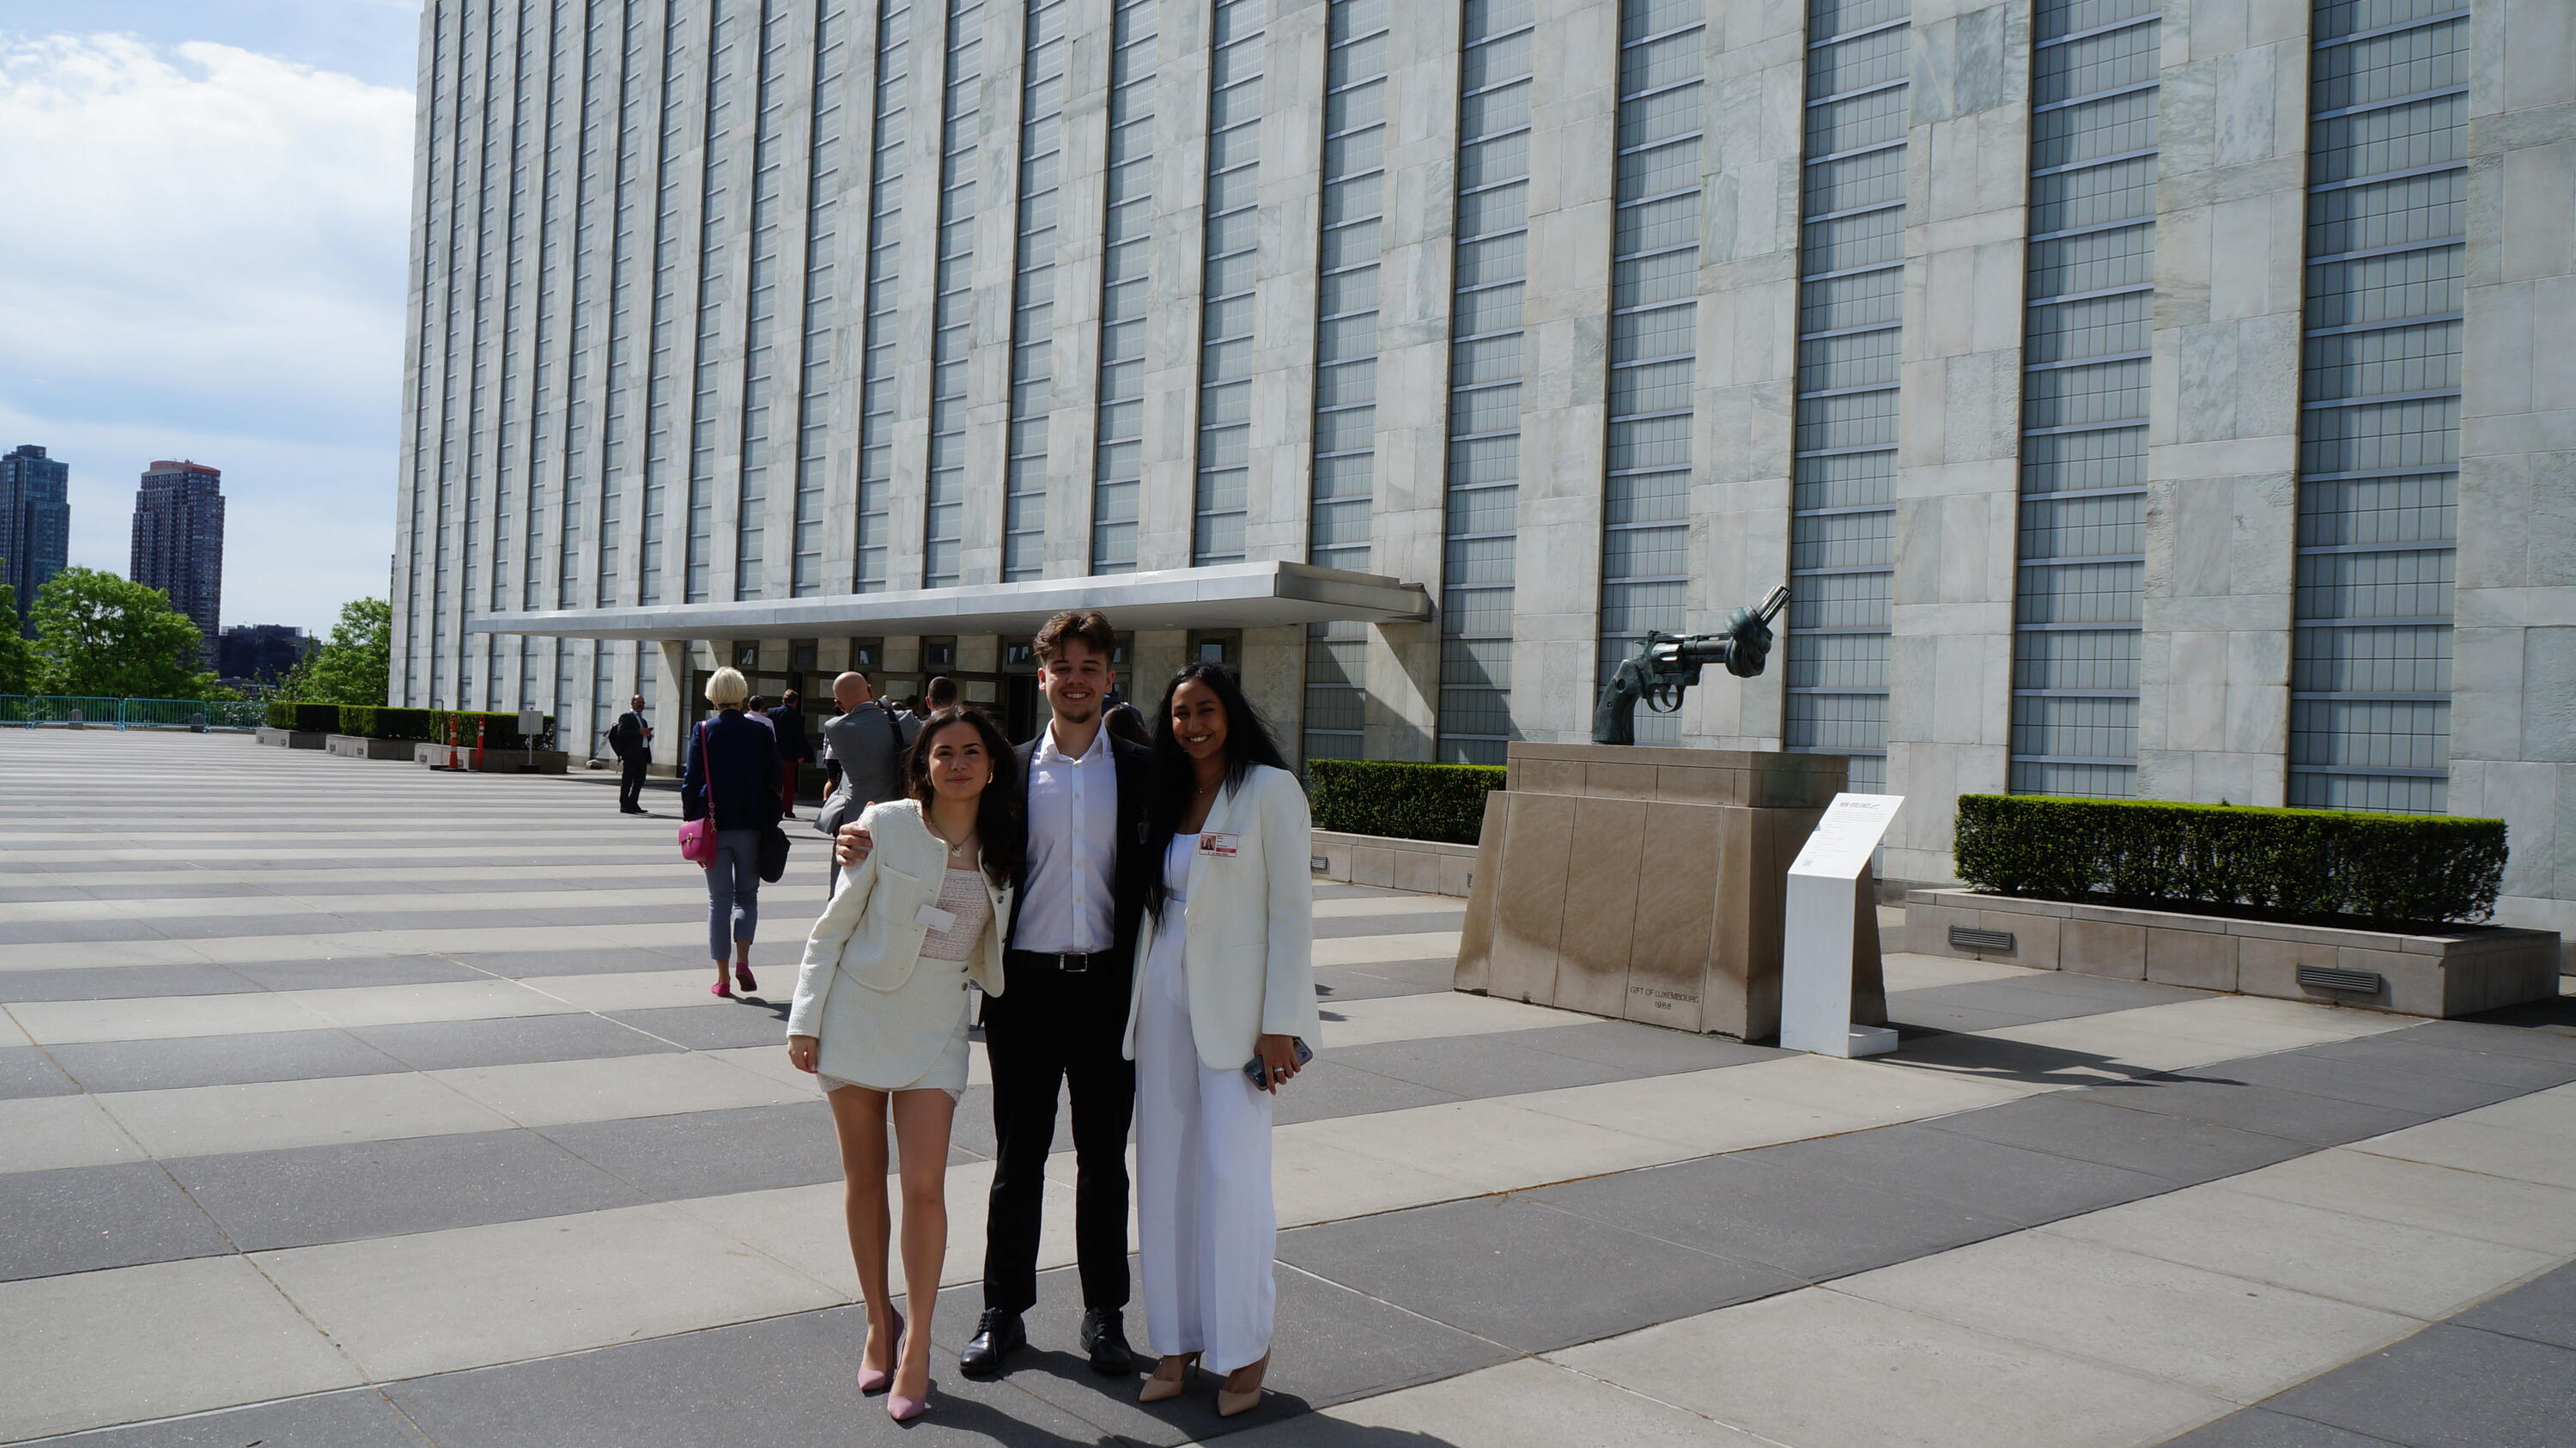 photo of the founding members wearing business-casual outfits. They are standing outside in front of the UN building